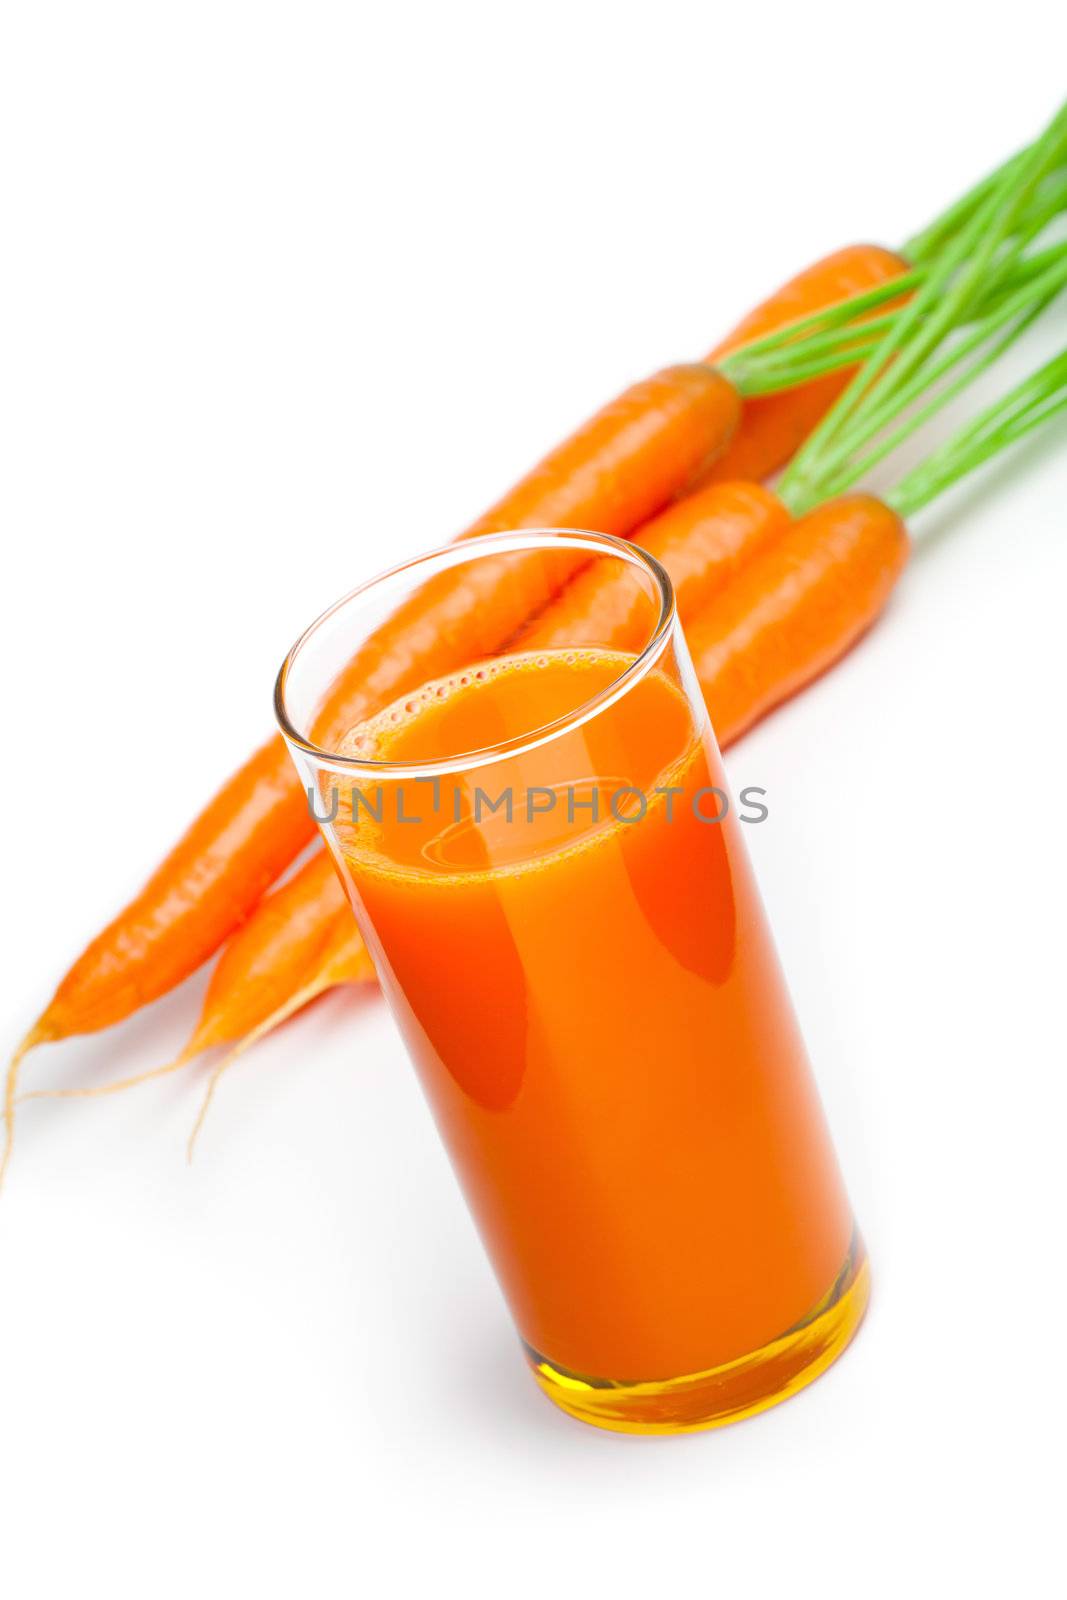 Carrot juice and fresh carrot, isolated on white background
 by motorolka